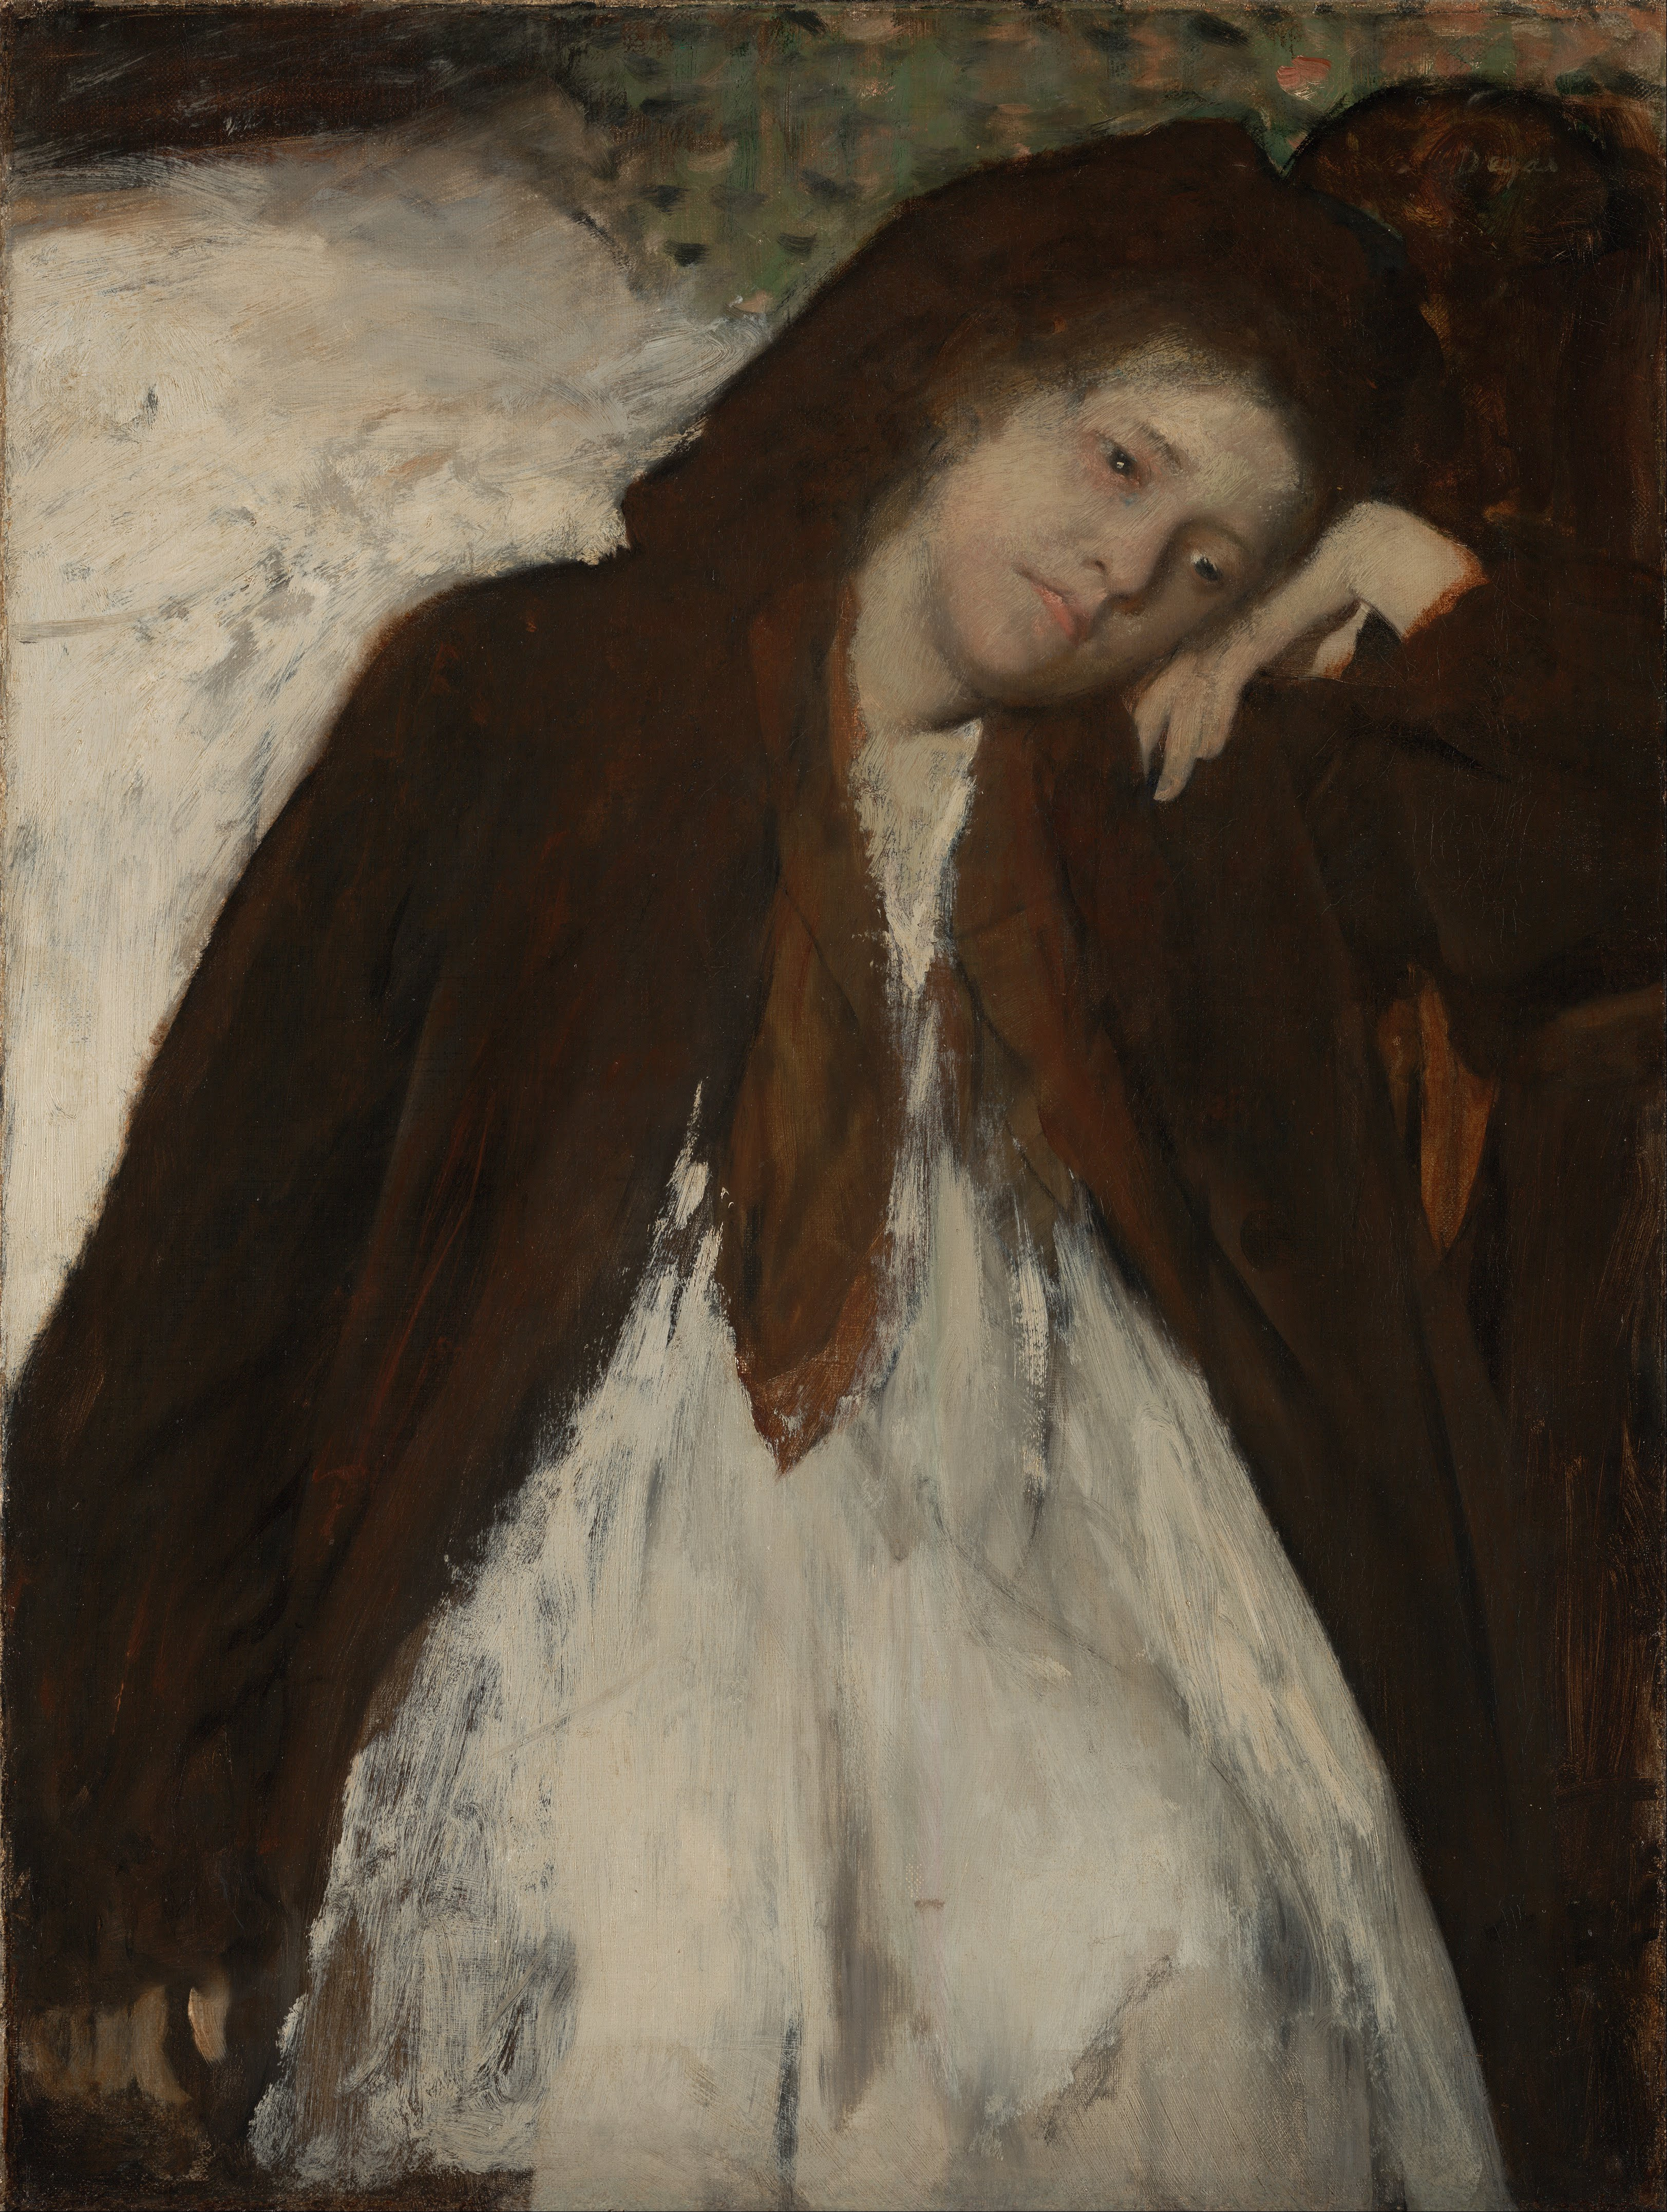 The Convalescent by Edgar Degas - 1872 - 1887 - - J. Paul Getty Museum